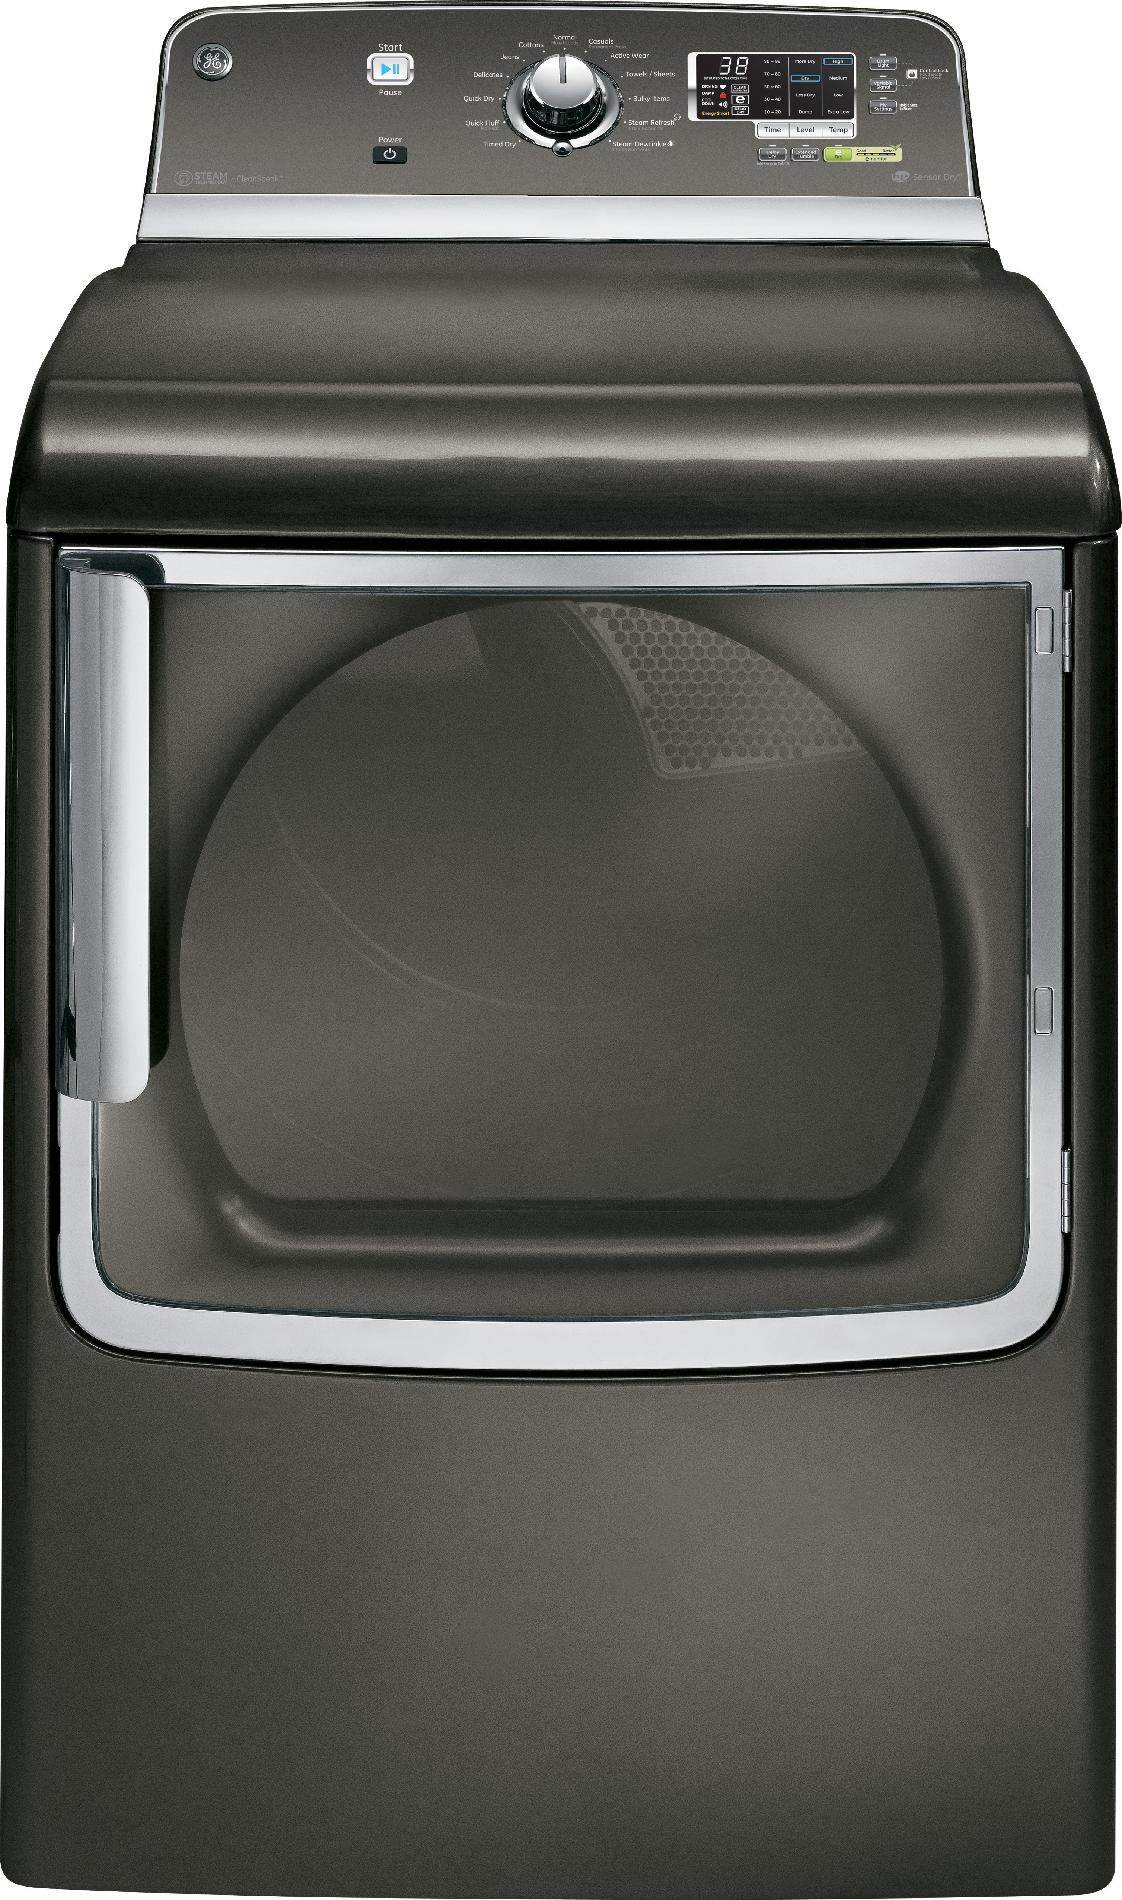 GE 7.8 cu. ft. Electric Dryer - Metallic 7.0 cu. ft. and greater